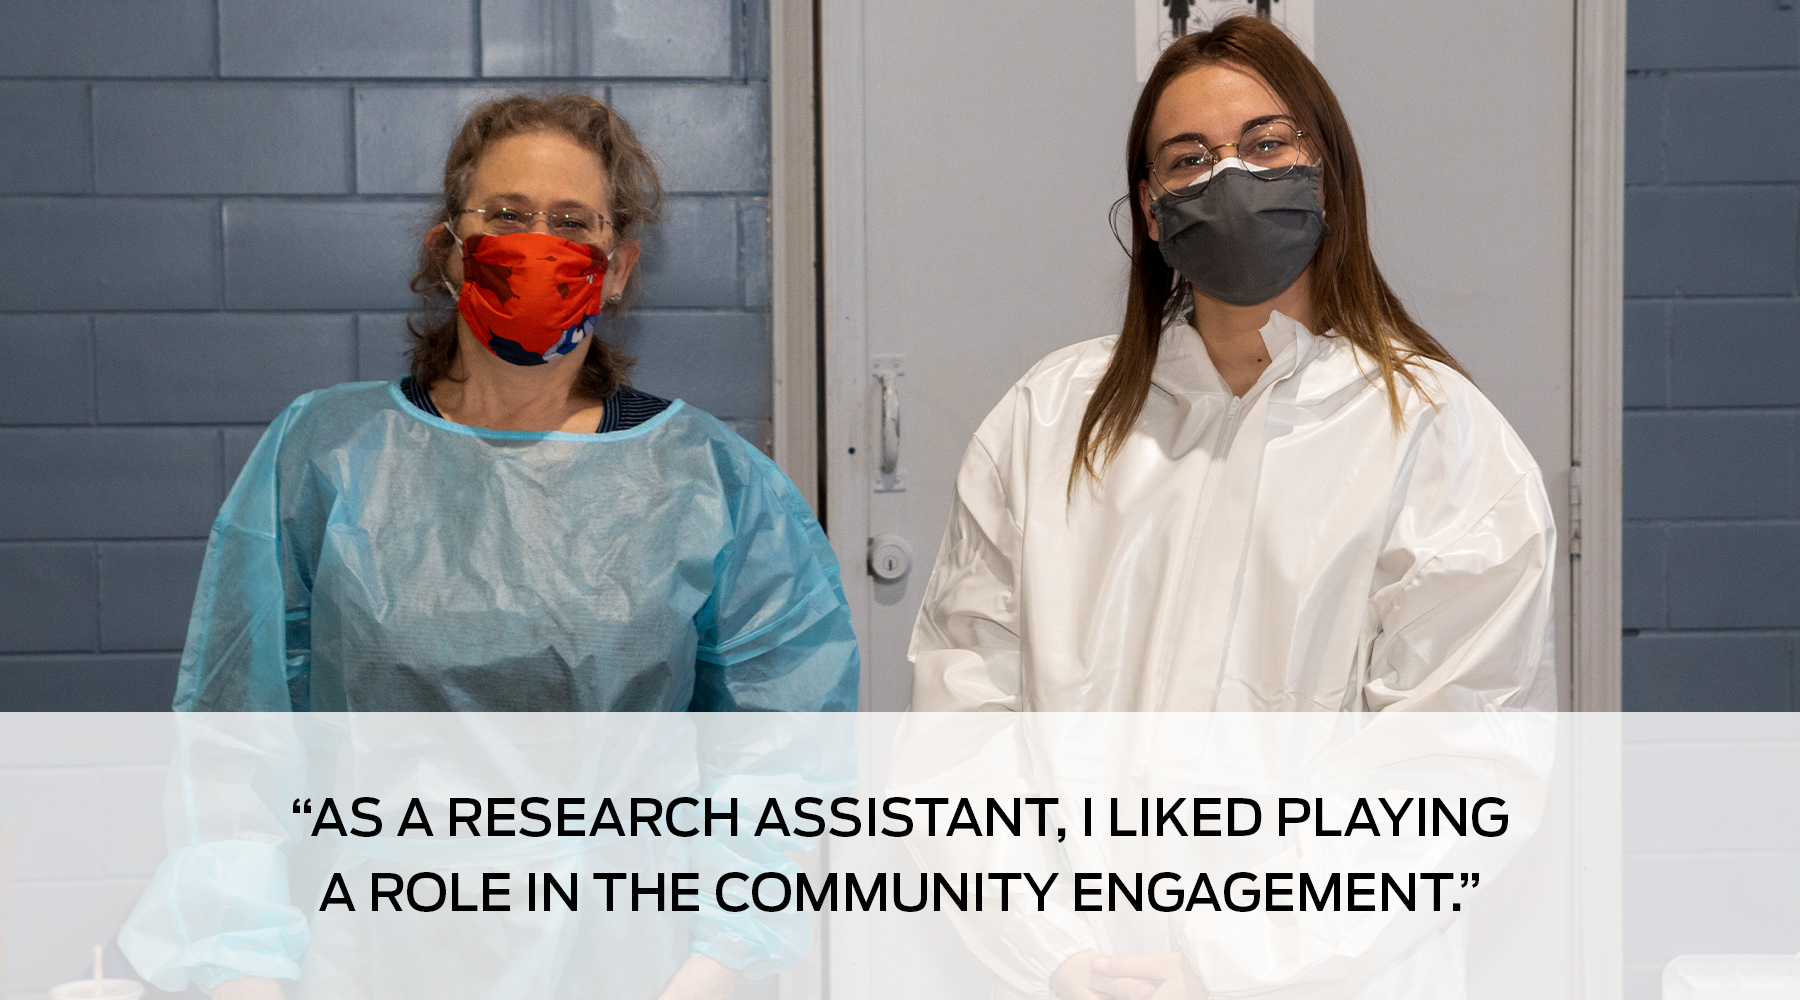 As a research assistant, I liked playing a role in the community engagement.